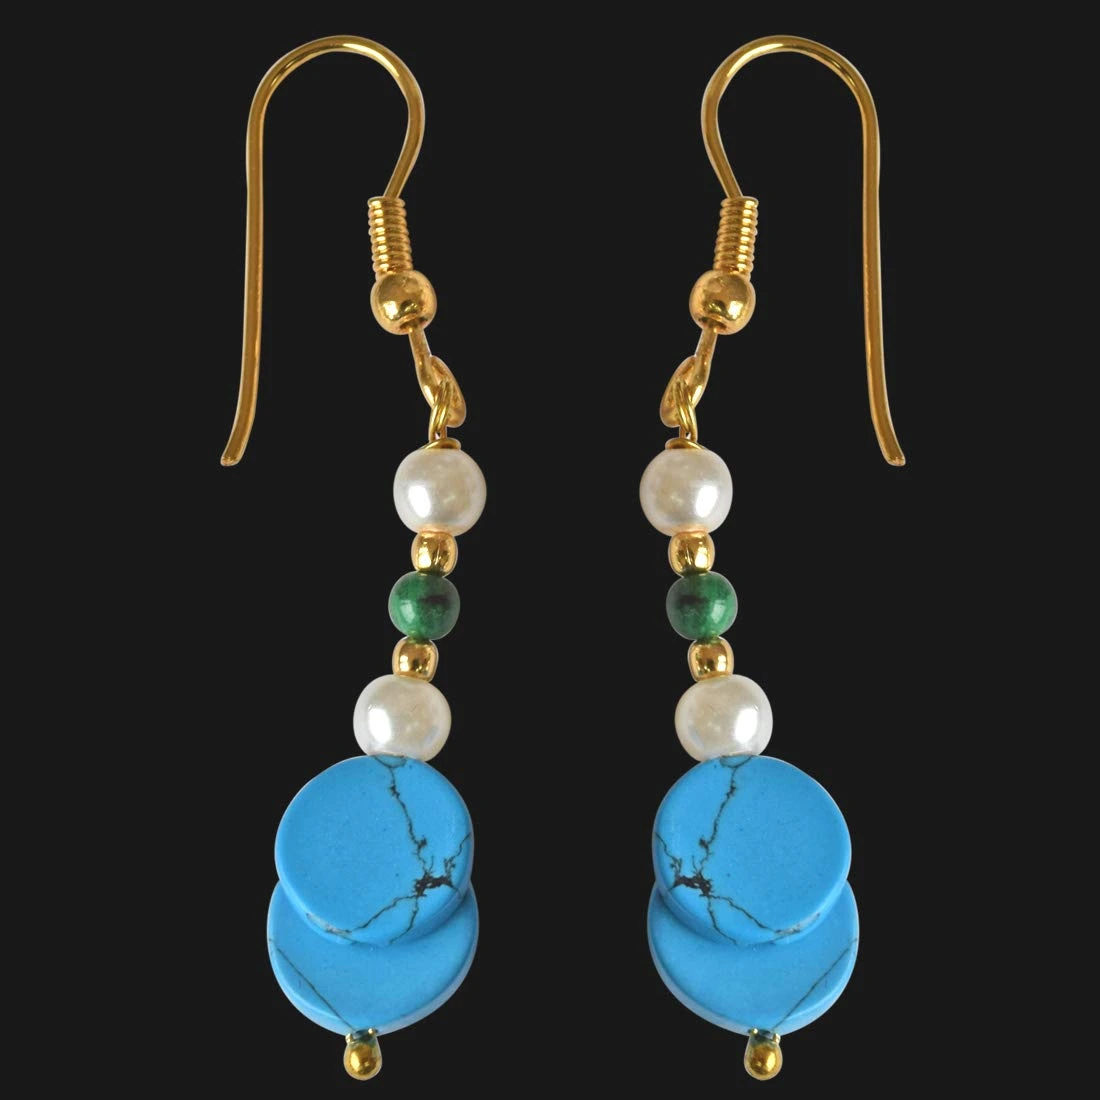 Gold Plated Hanging Earring with Pearl, Malachite and Turquoise Gemstones for Women (SE259)